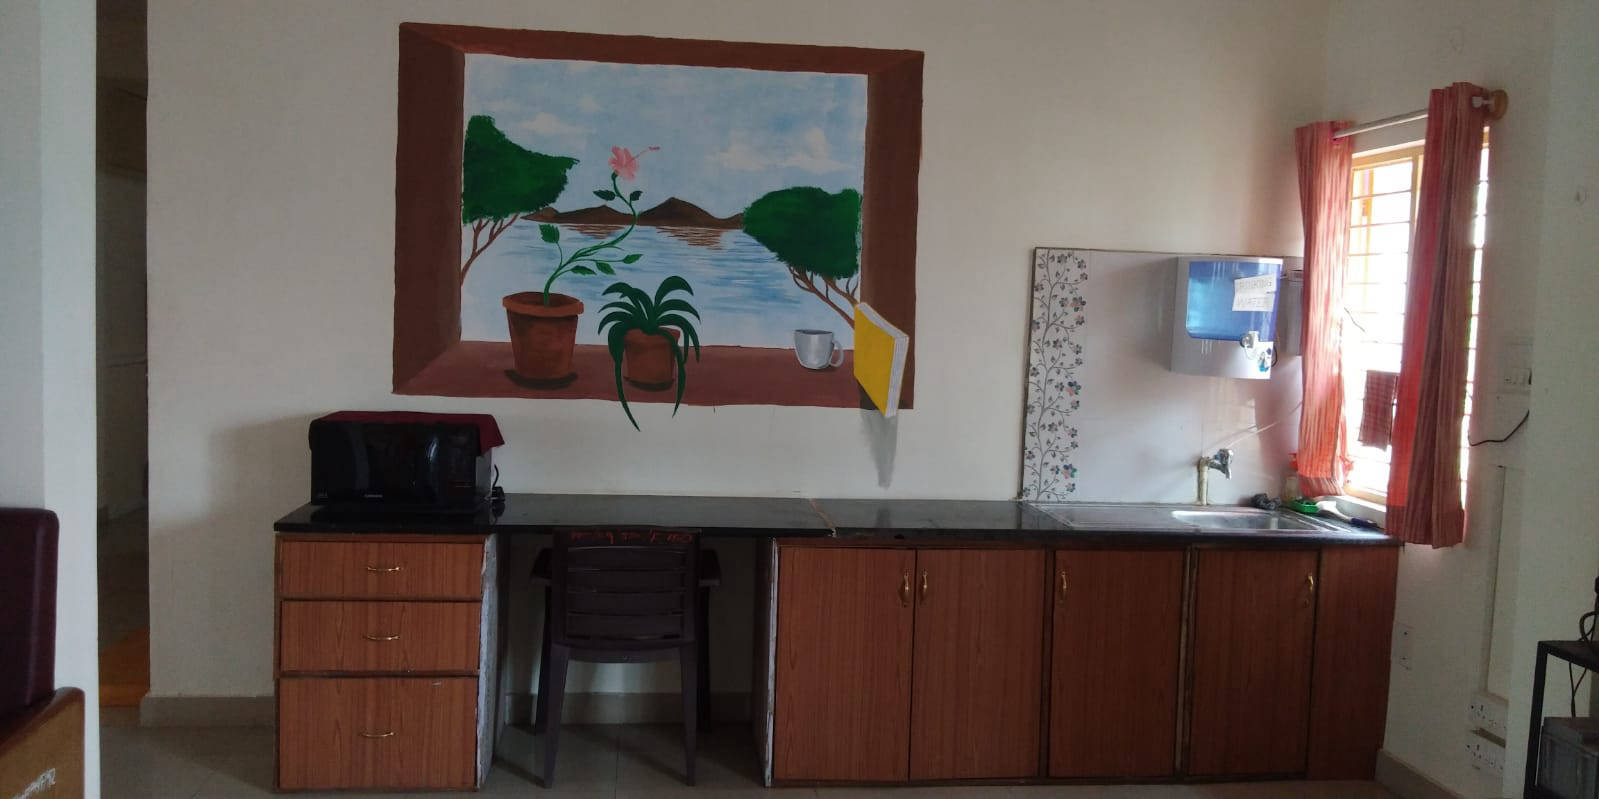 A small Kitchenette at the Day Care Centre enable warming of food or preparing coffee